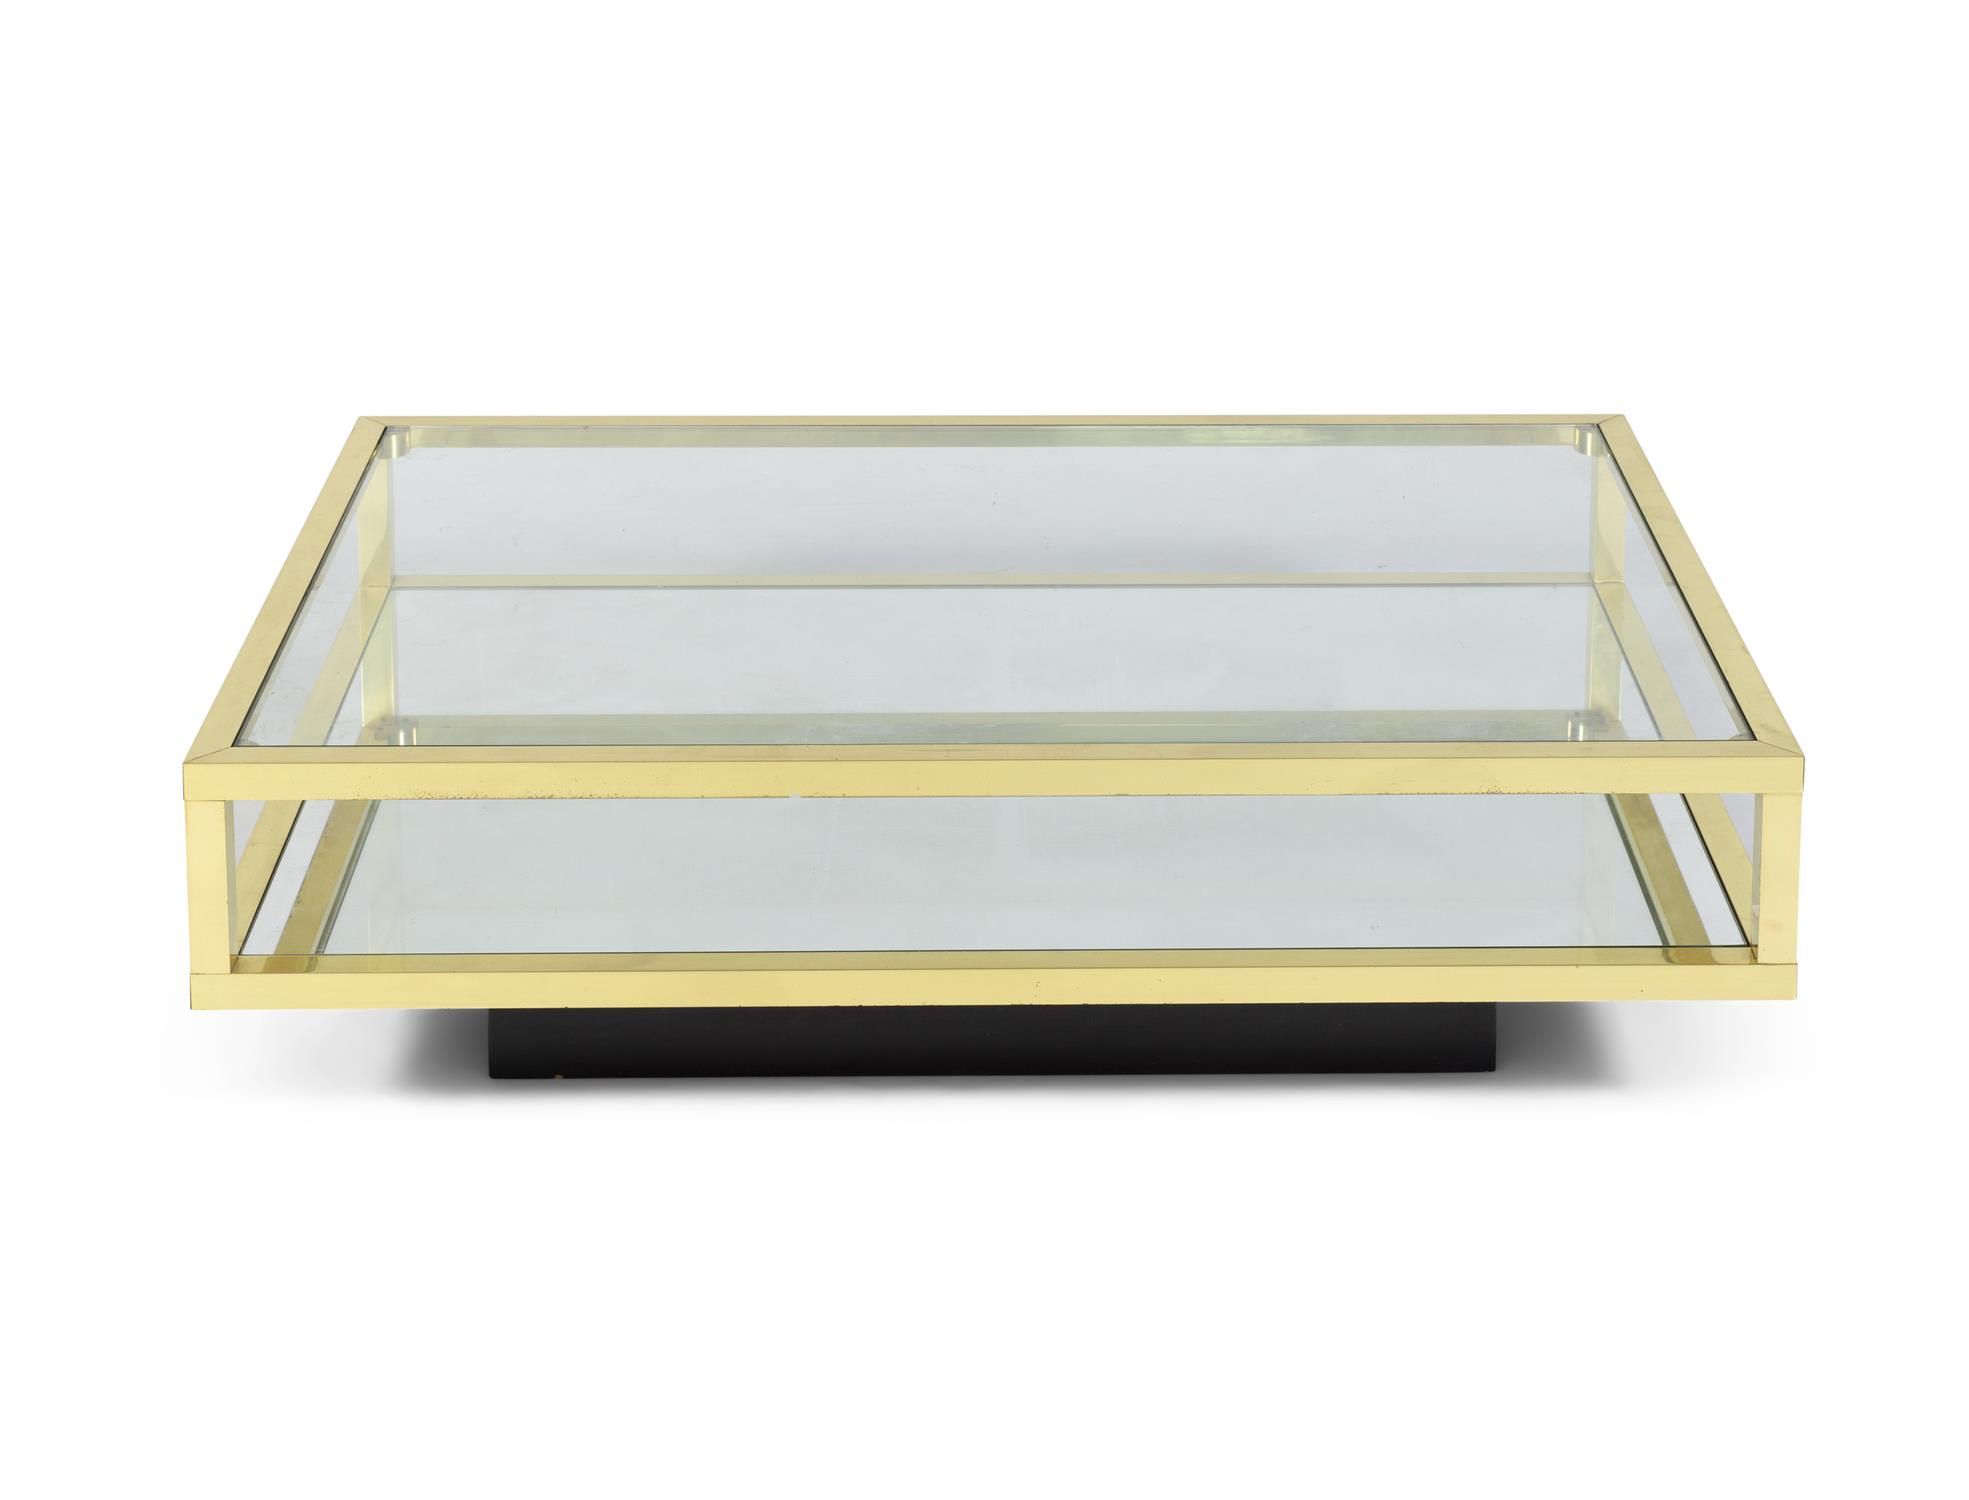 COFFEE TABLE A brass two tier coffee table with glass and mirror tops. Italy, c.1970.